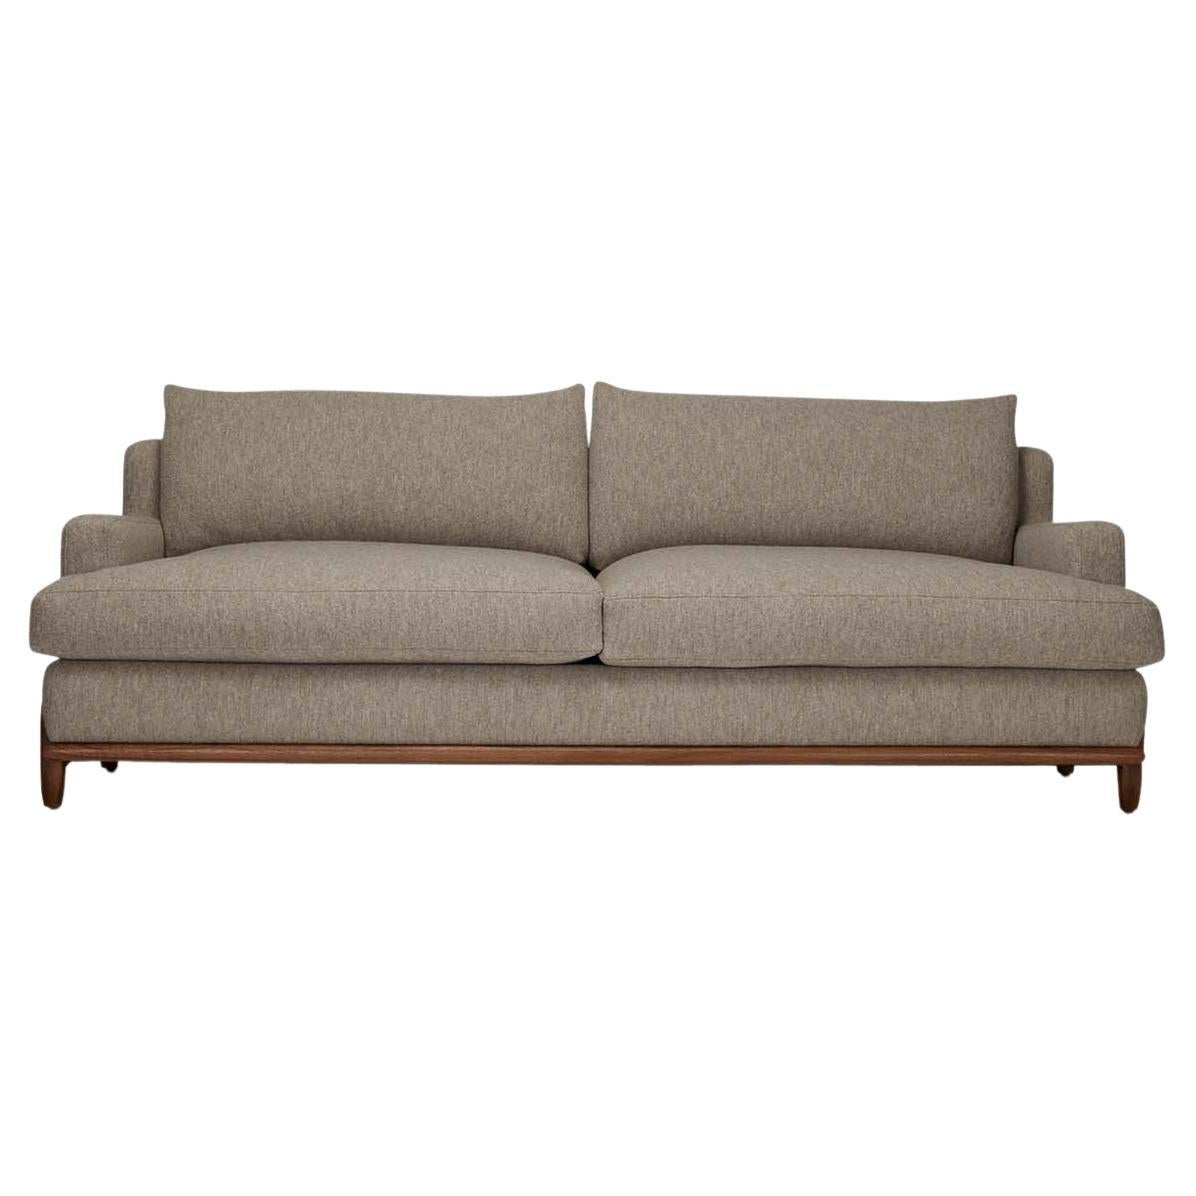 George Sofa by Brian Paquette for Lawson-Fenning For Sale